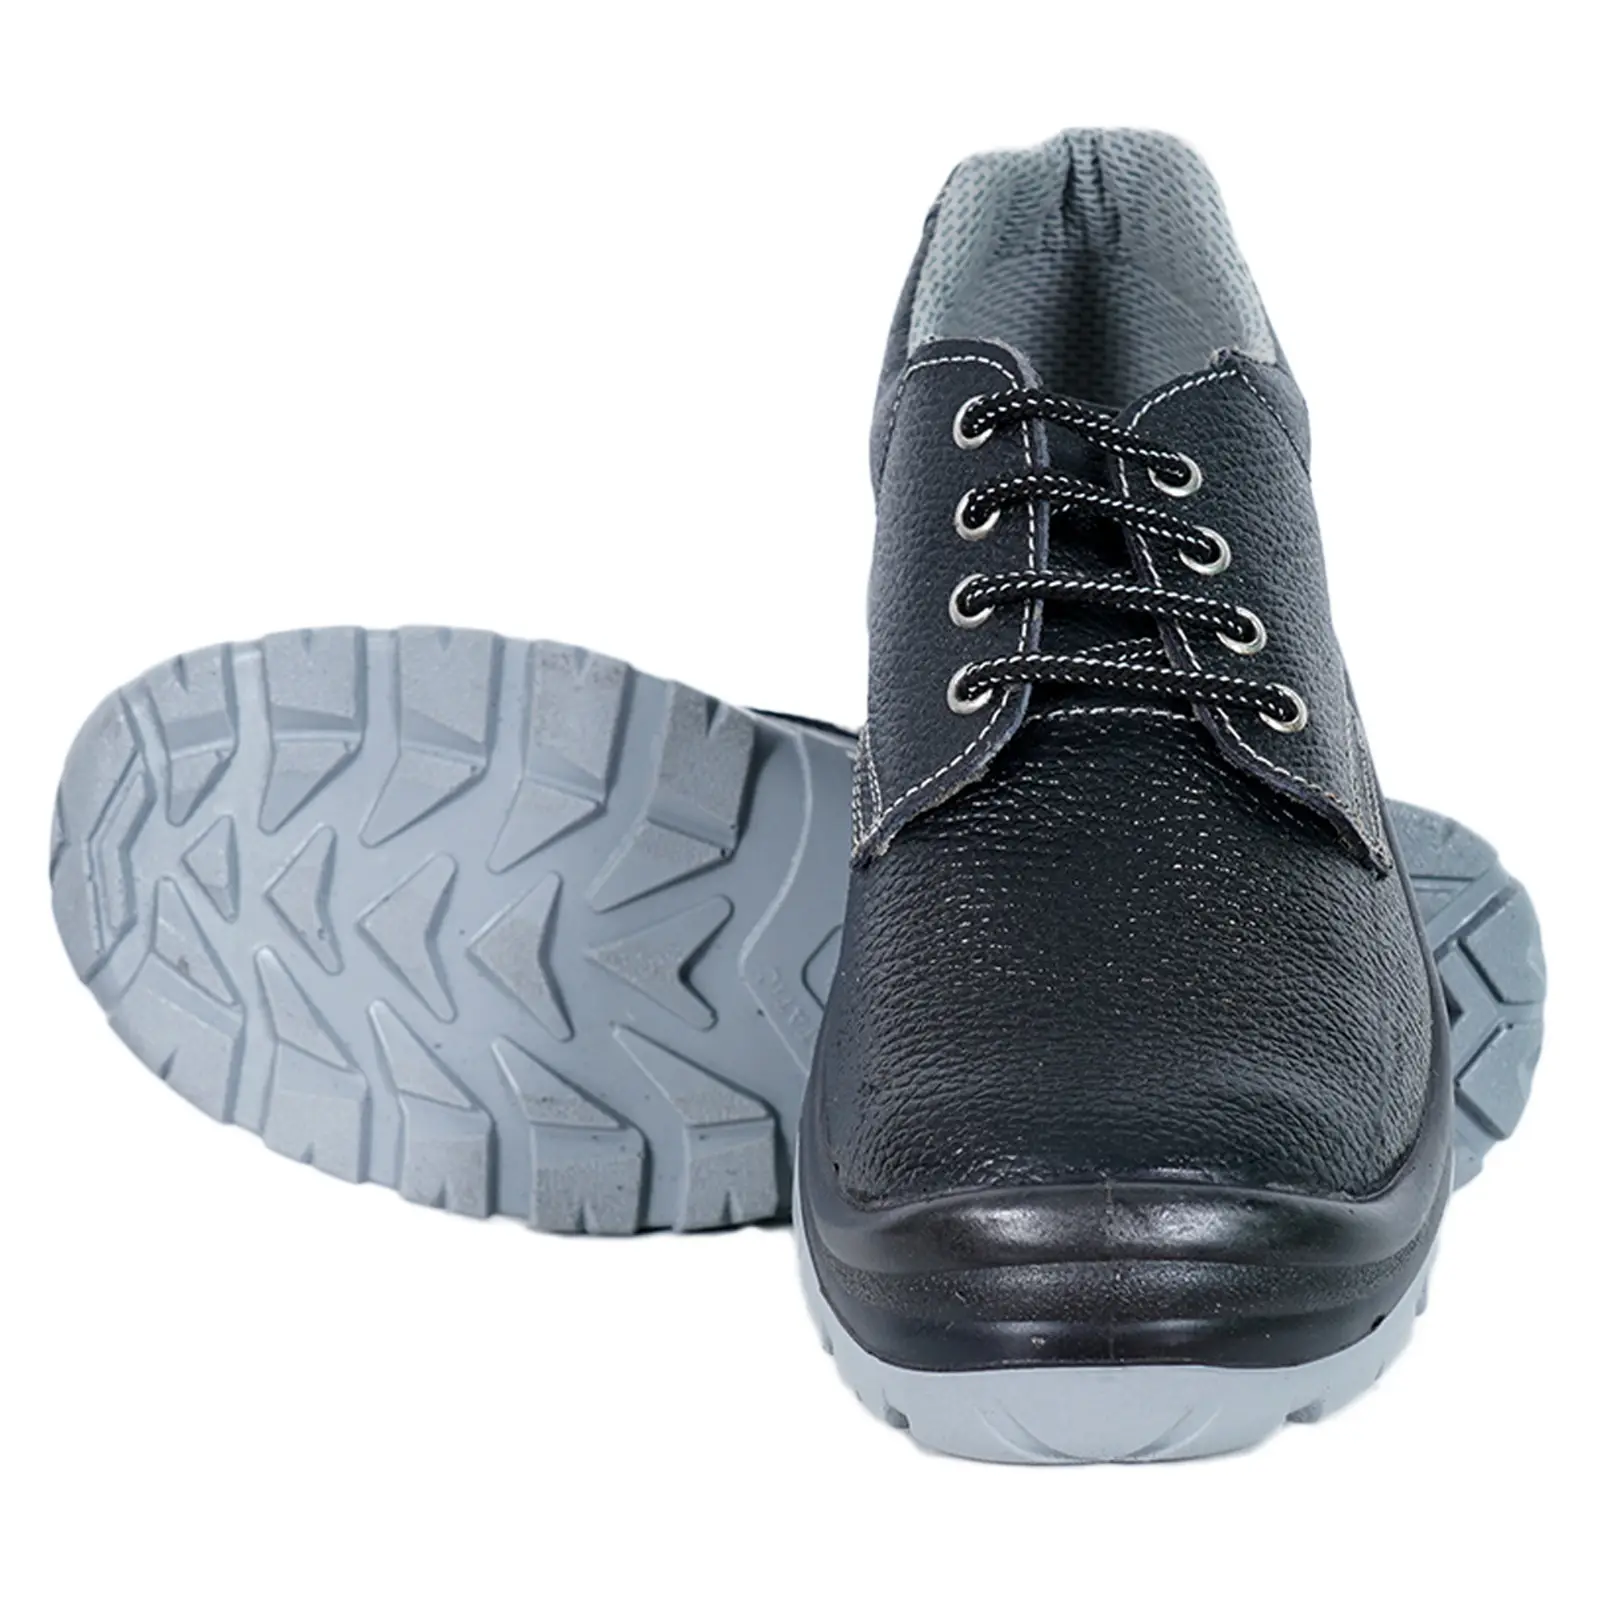 Heavy-duty safety footwear with steel toe anti-skid sole for construction industrial mining welding footcare Comfortable